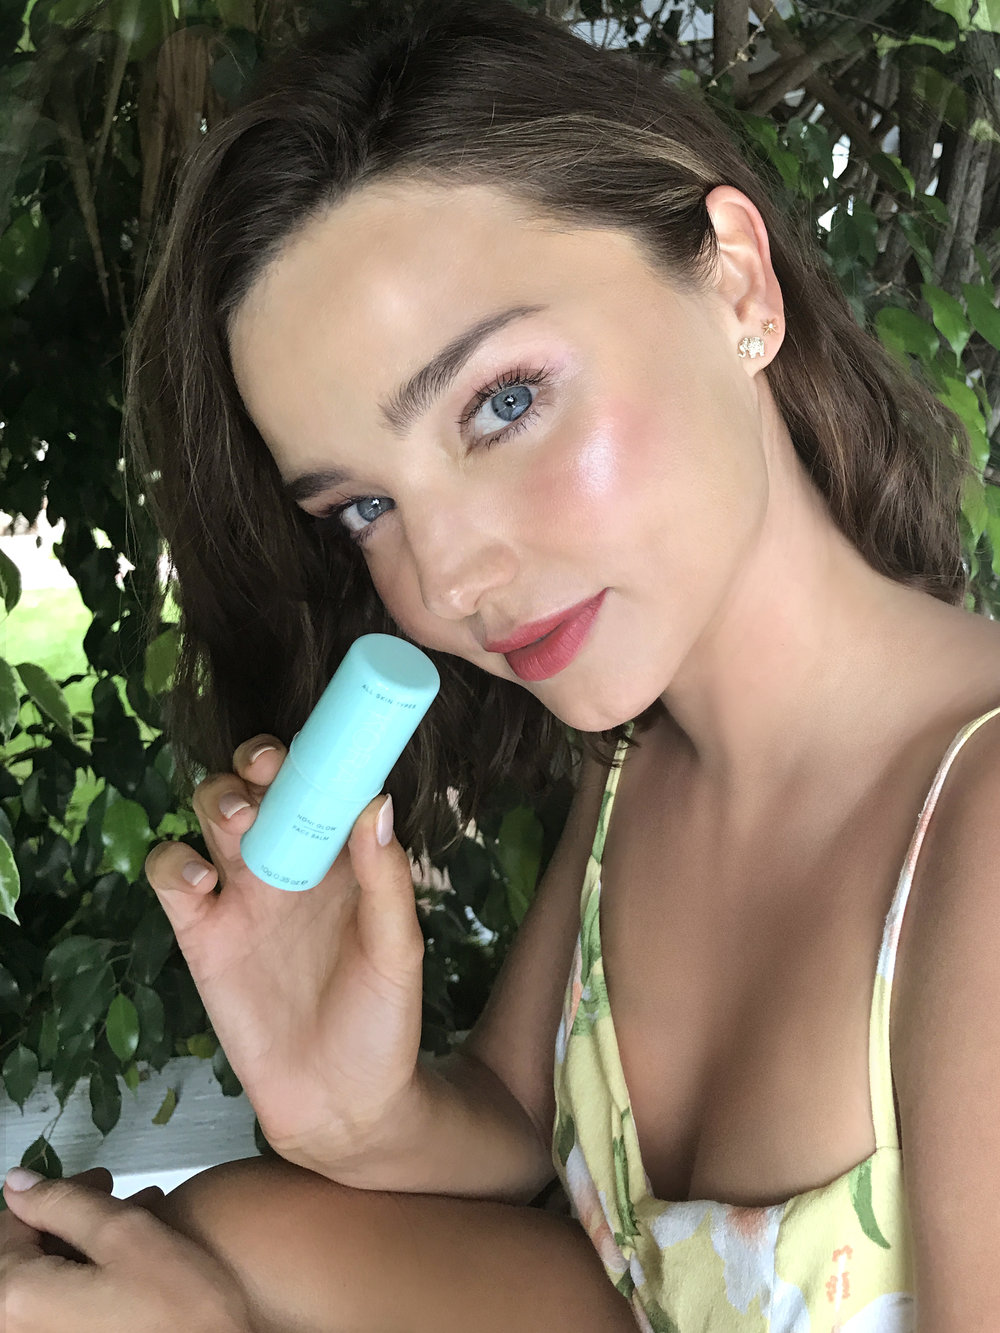 Miranda Kerr's Go-To Tinted Serum for a Natural Glow